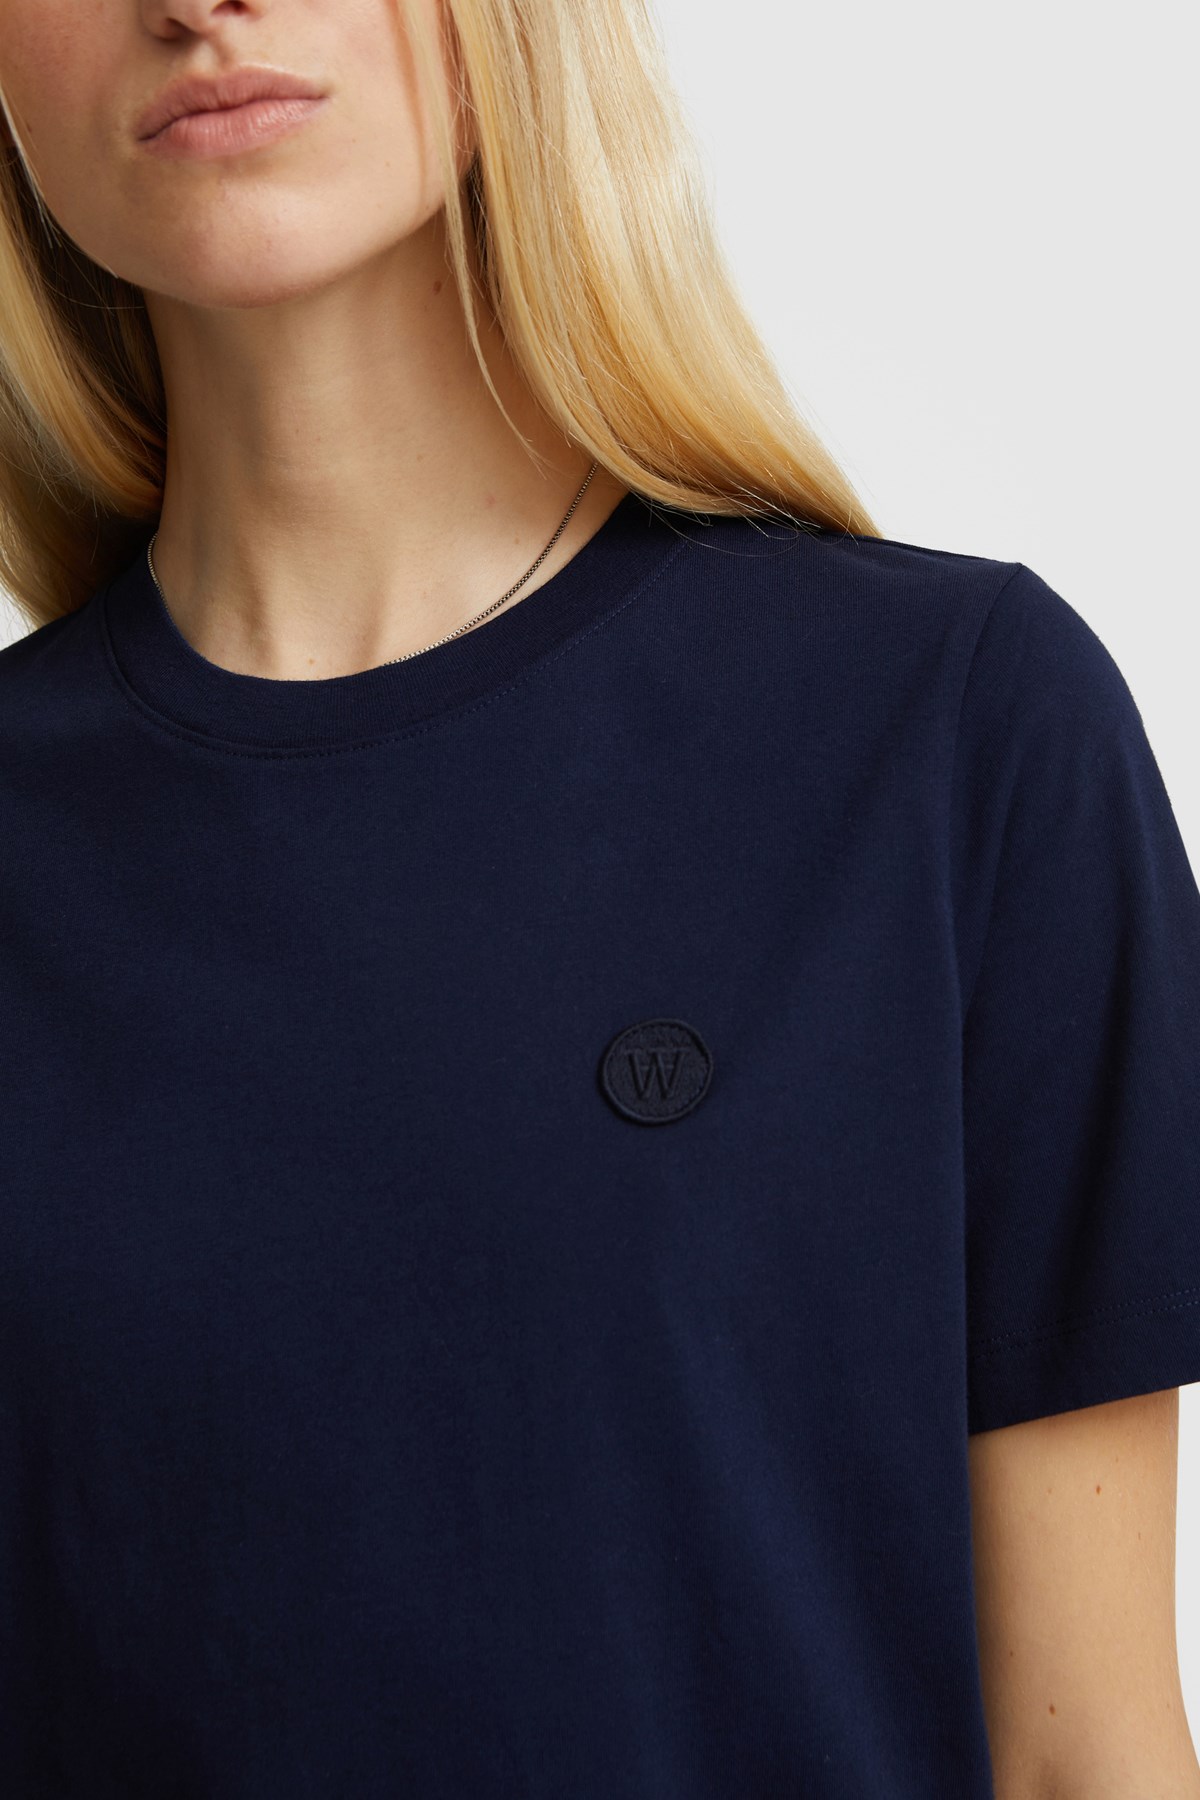 Double A by Wood Wood Mia T-shirt Navy | WoodWood.com